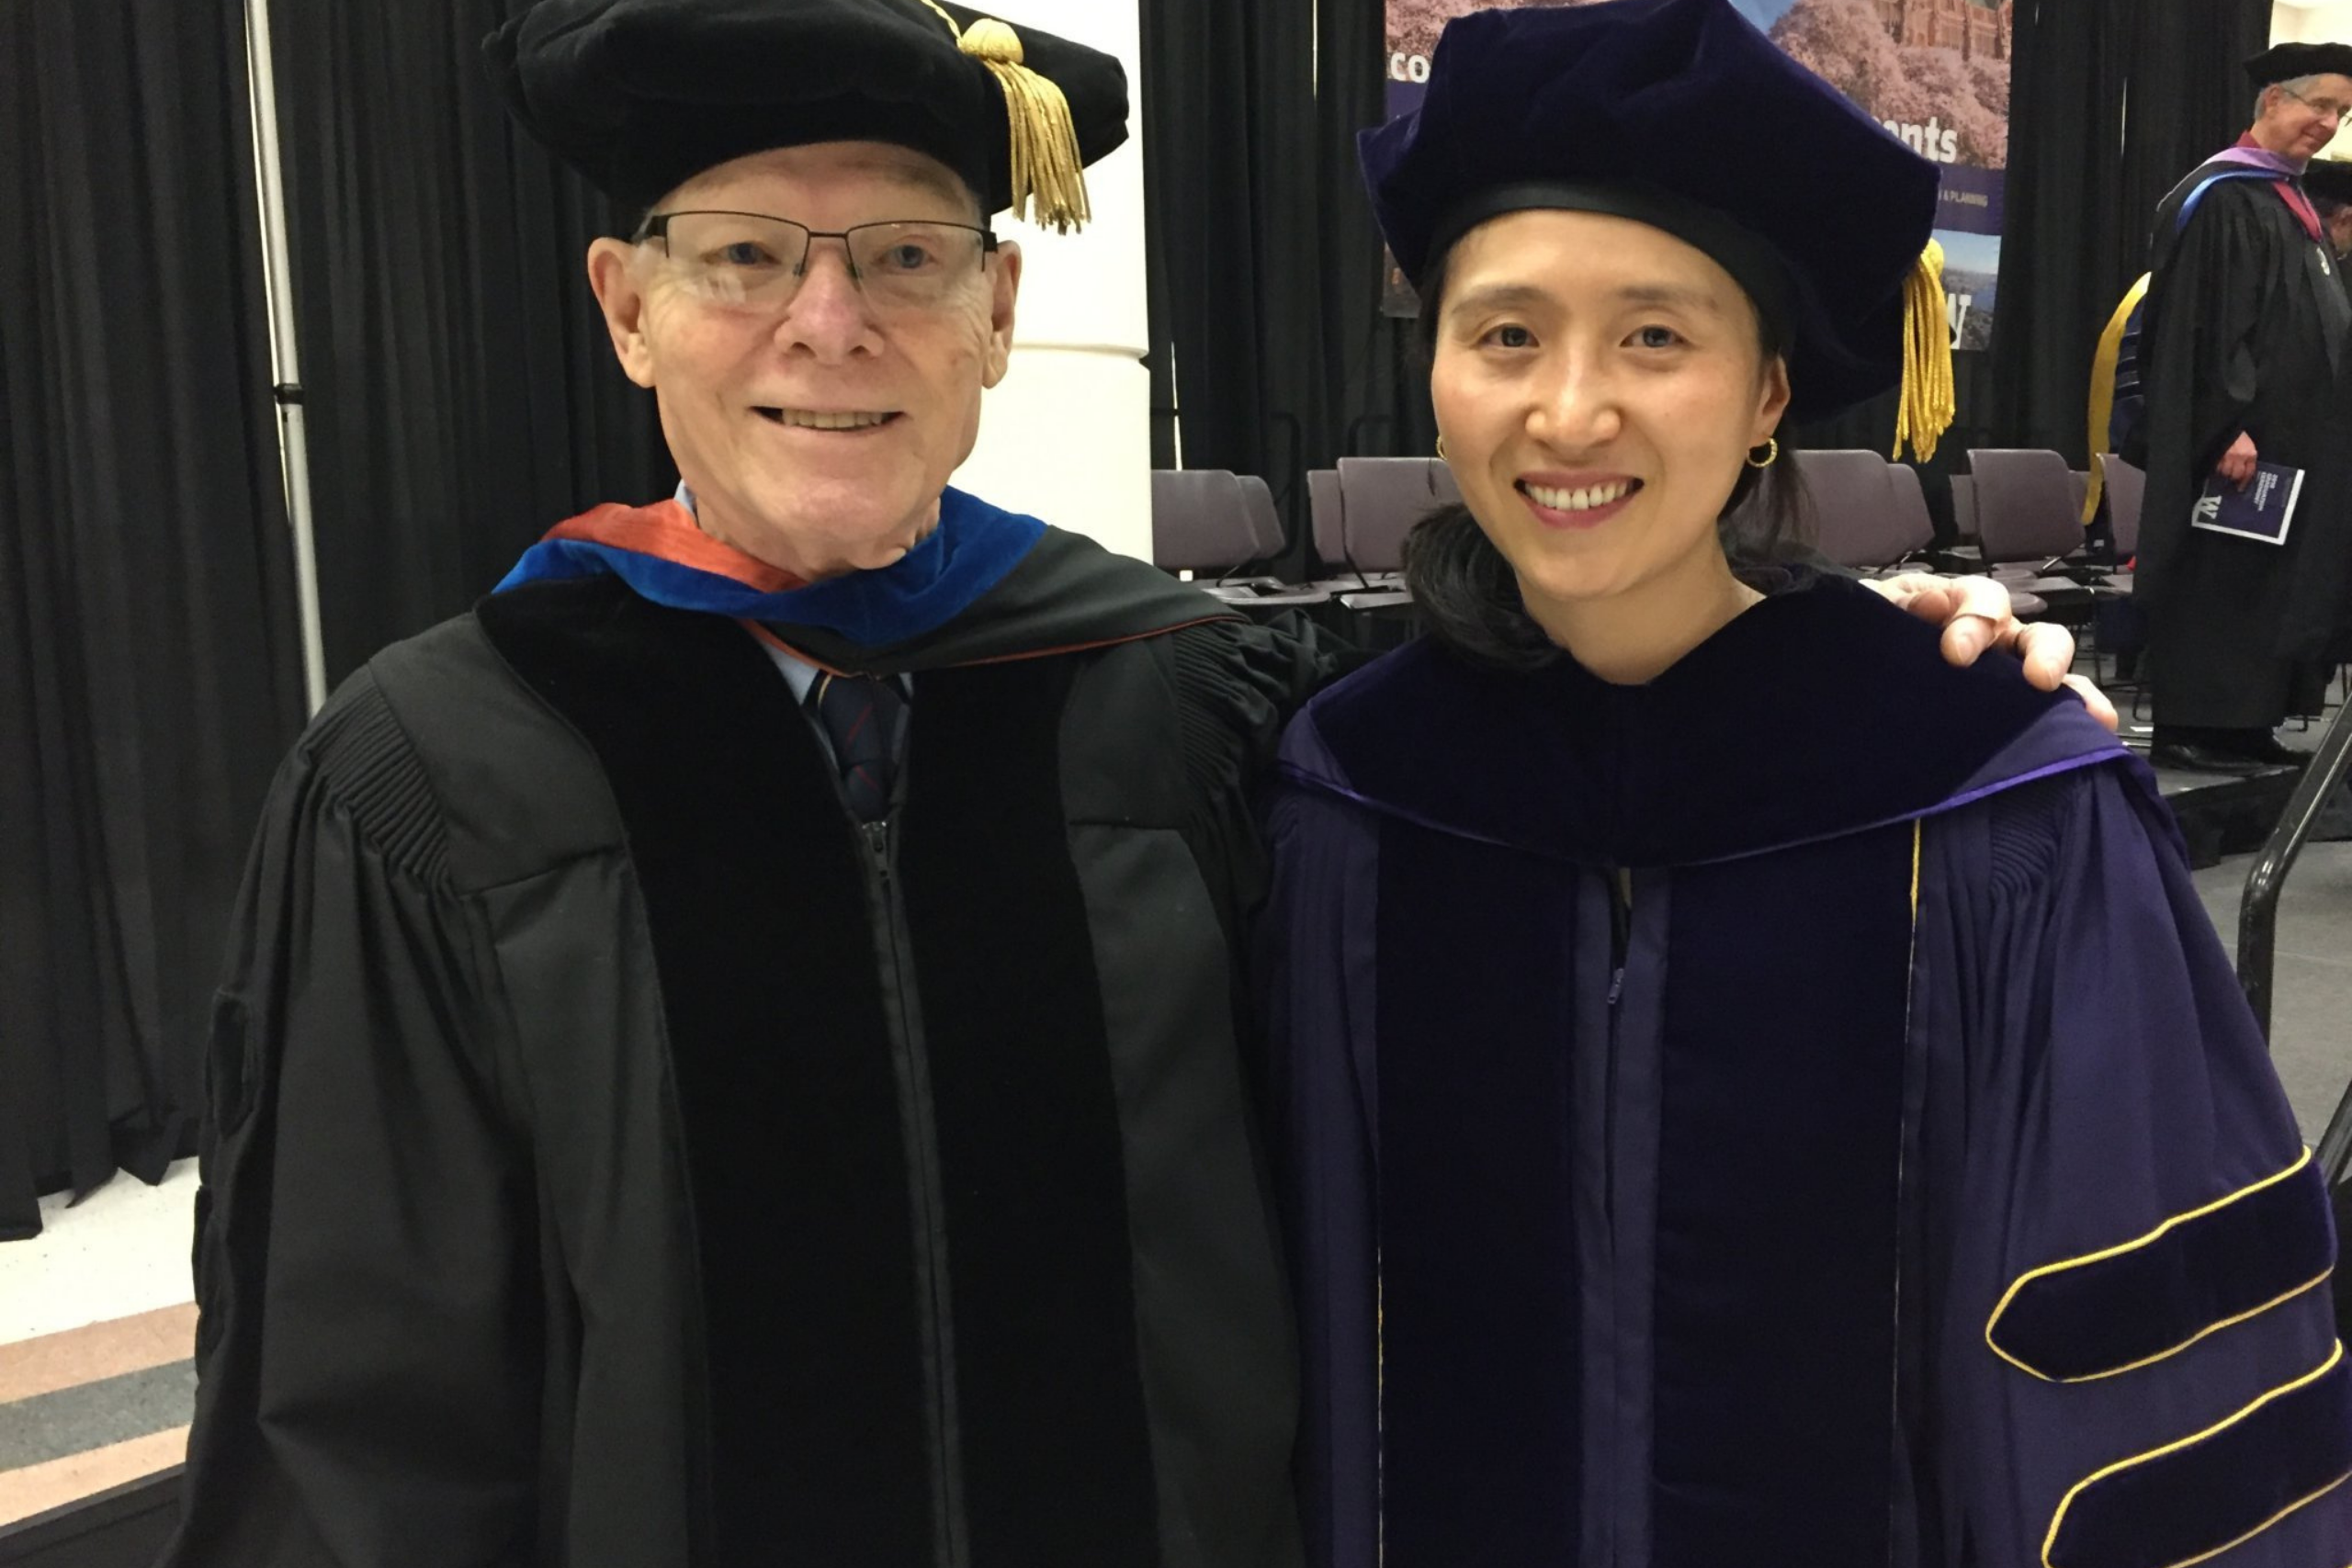 Dr. Bob with a student at graduation